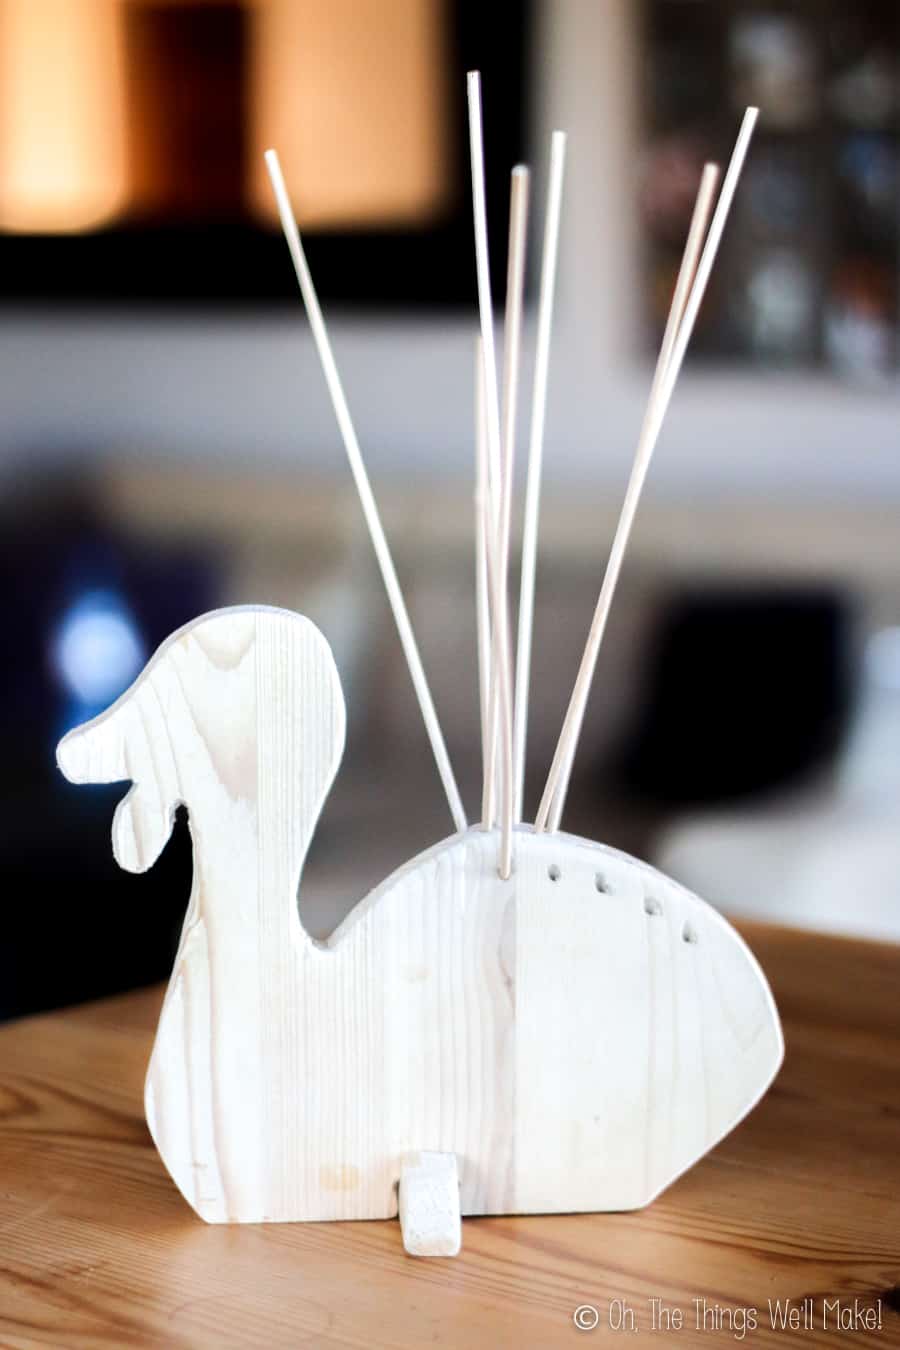 A wooden turkey display holding some bamboo skewers